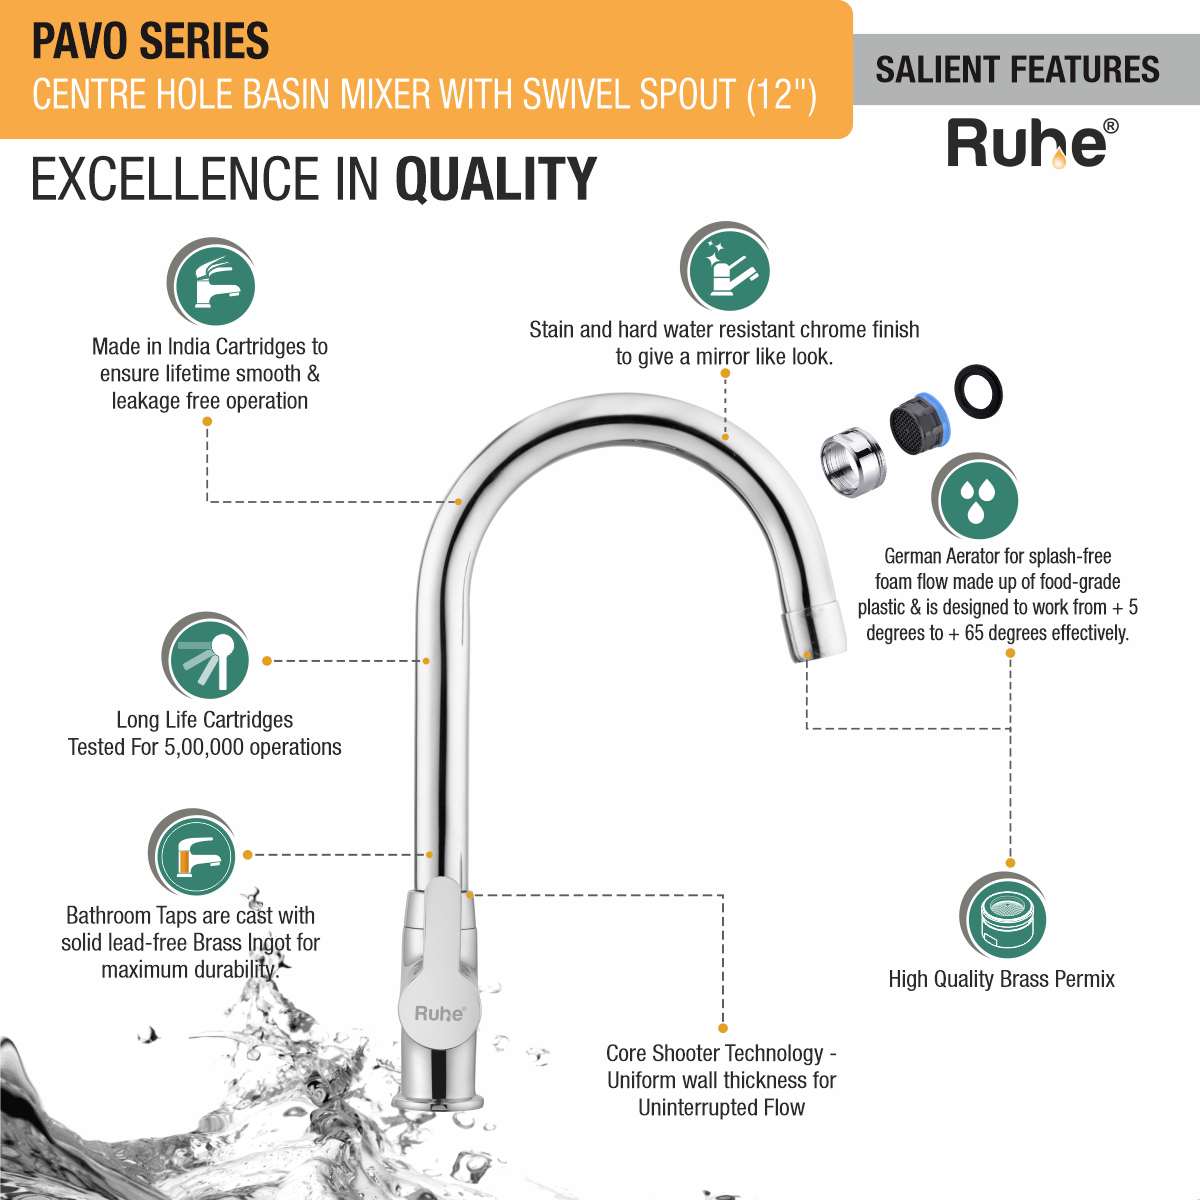 Pavo Centre Hole Basin Mixer with Small (12 inches) Round Swivel Spout Faucet features